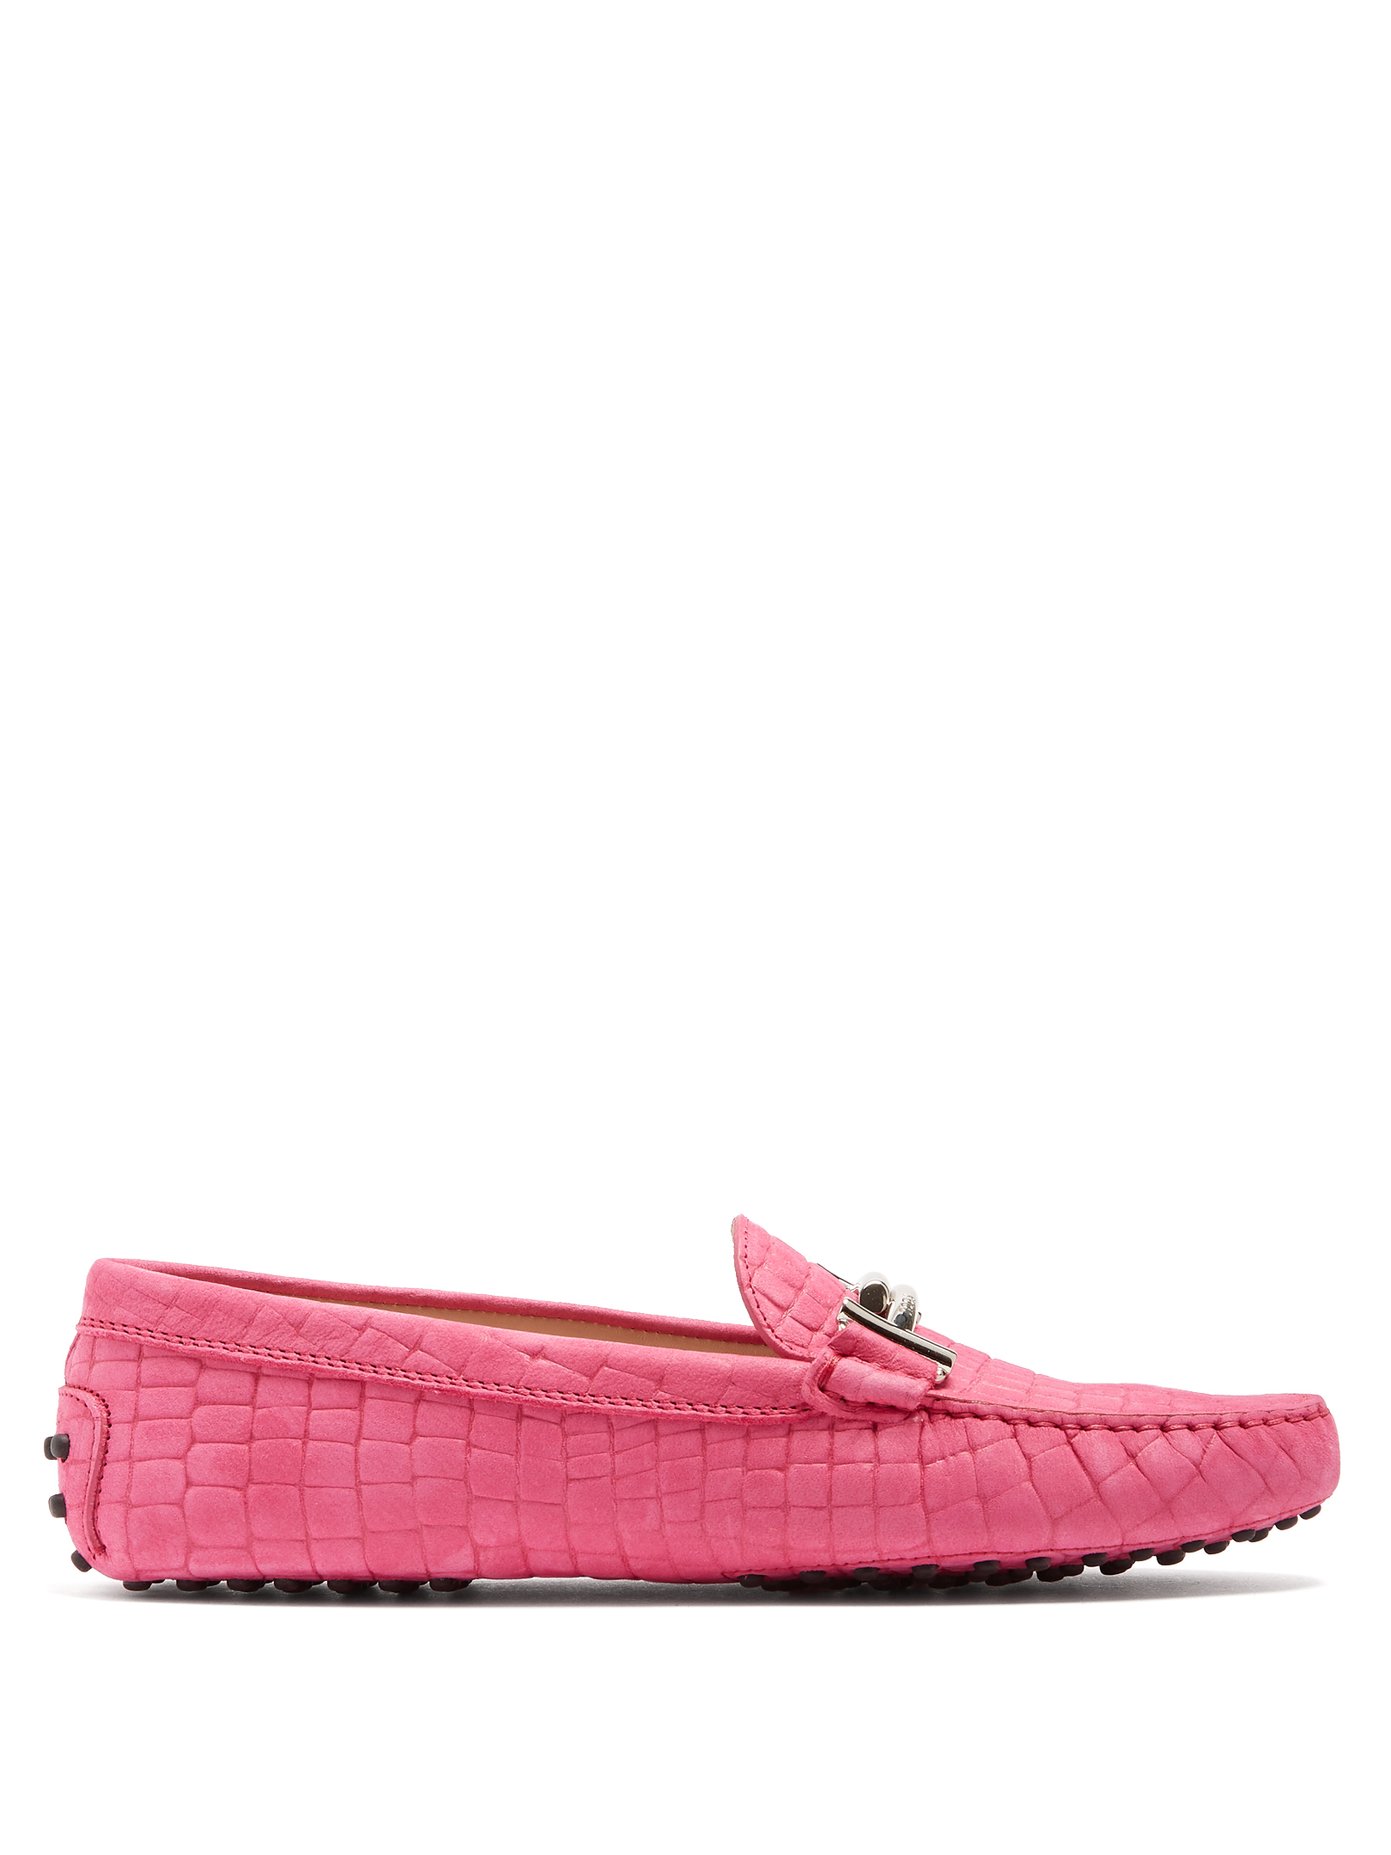 tod's pink suede loafers